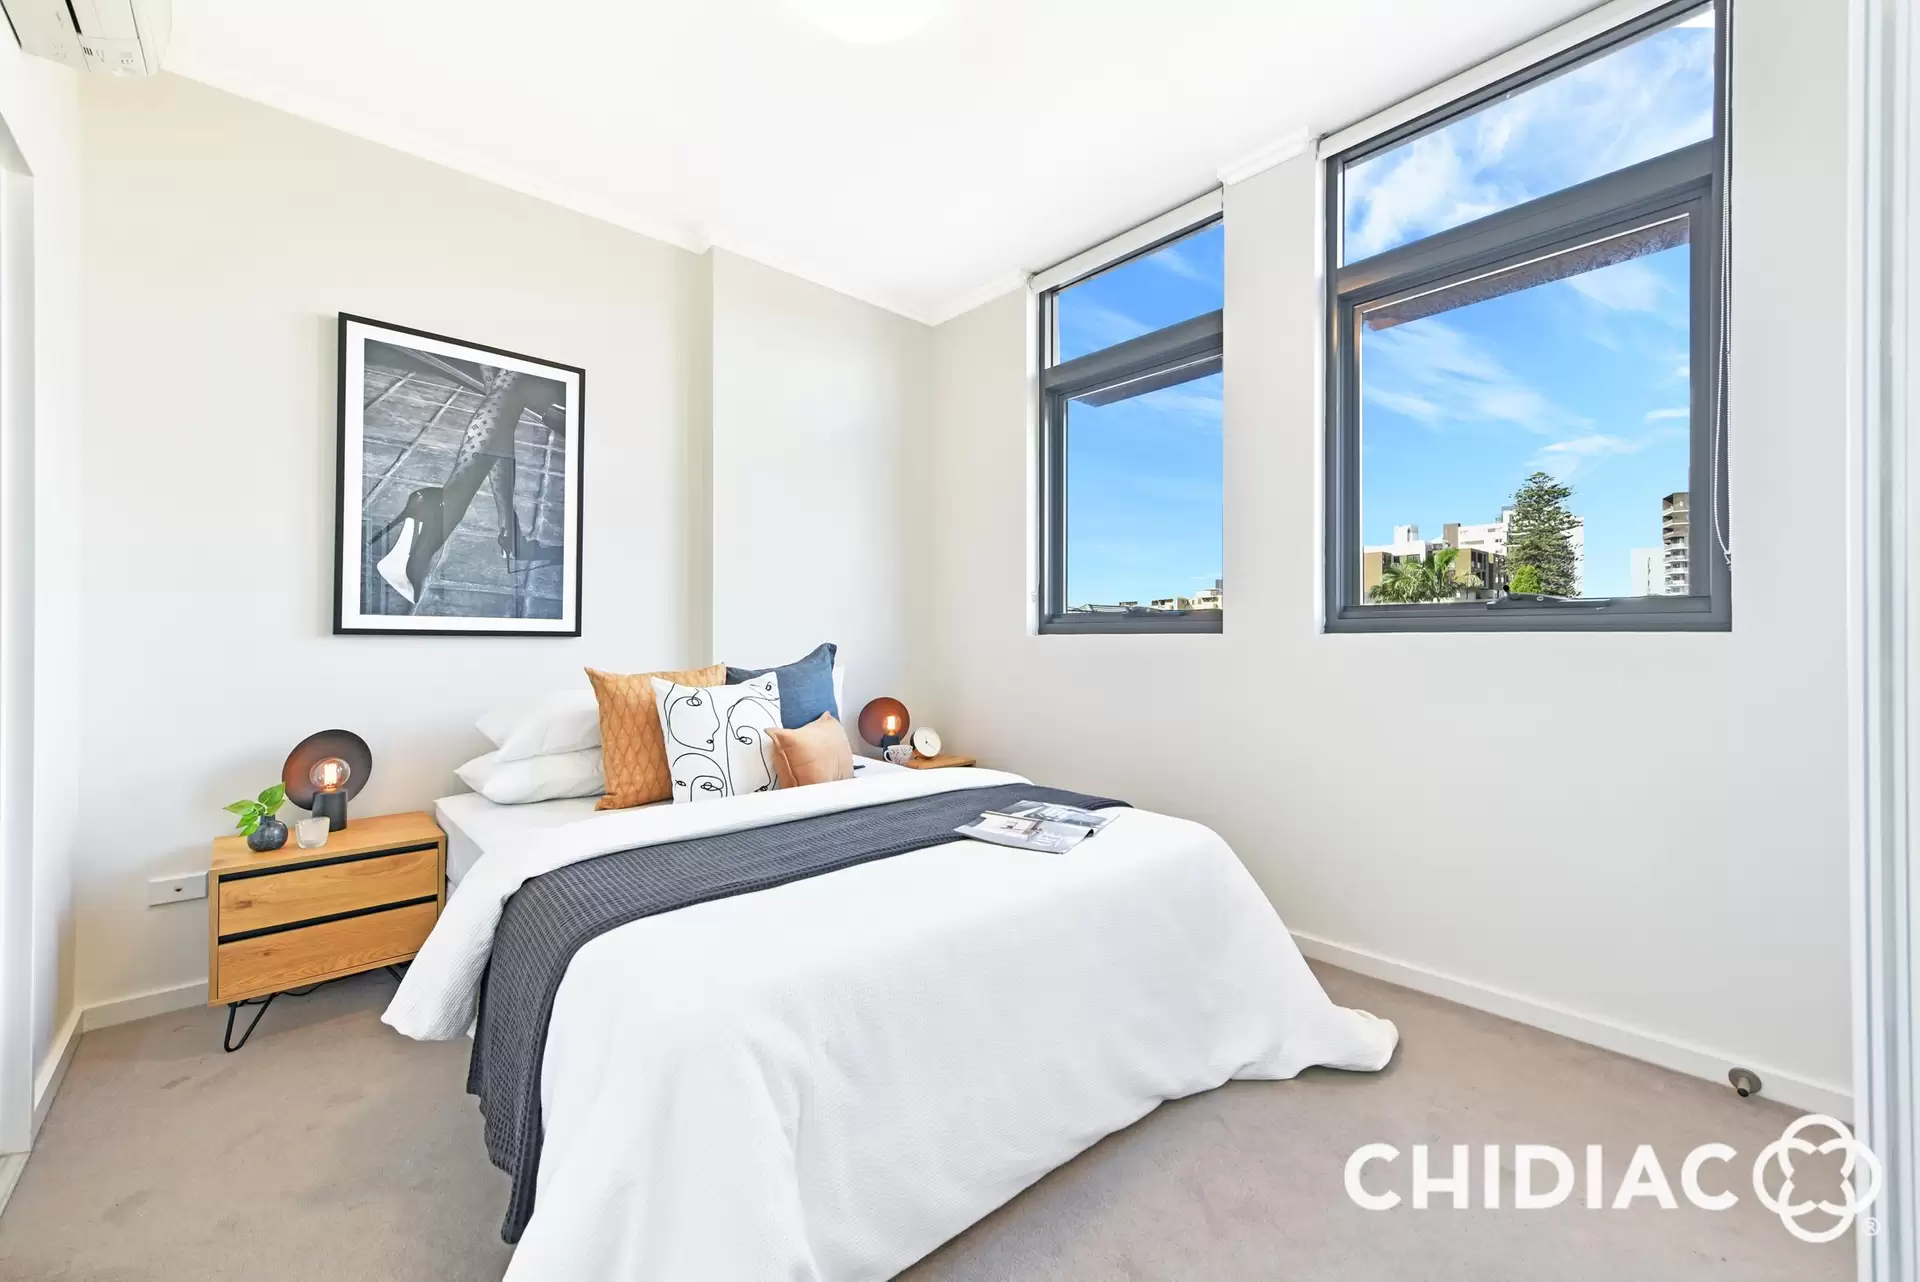 14/9 Carilla Street, Burwood Leased by Chidiac Realty - image 1